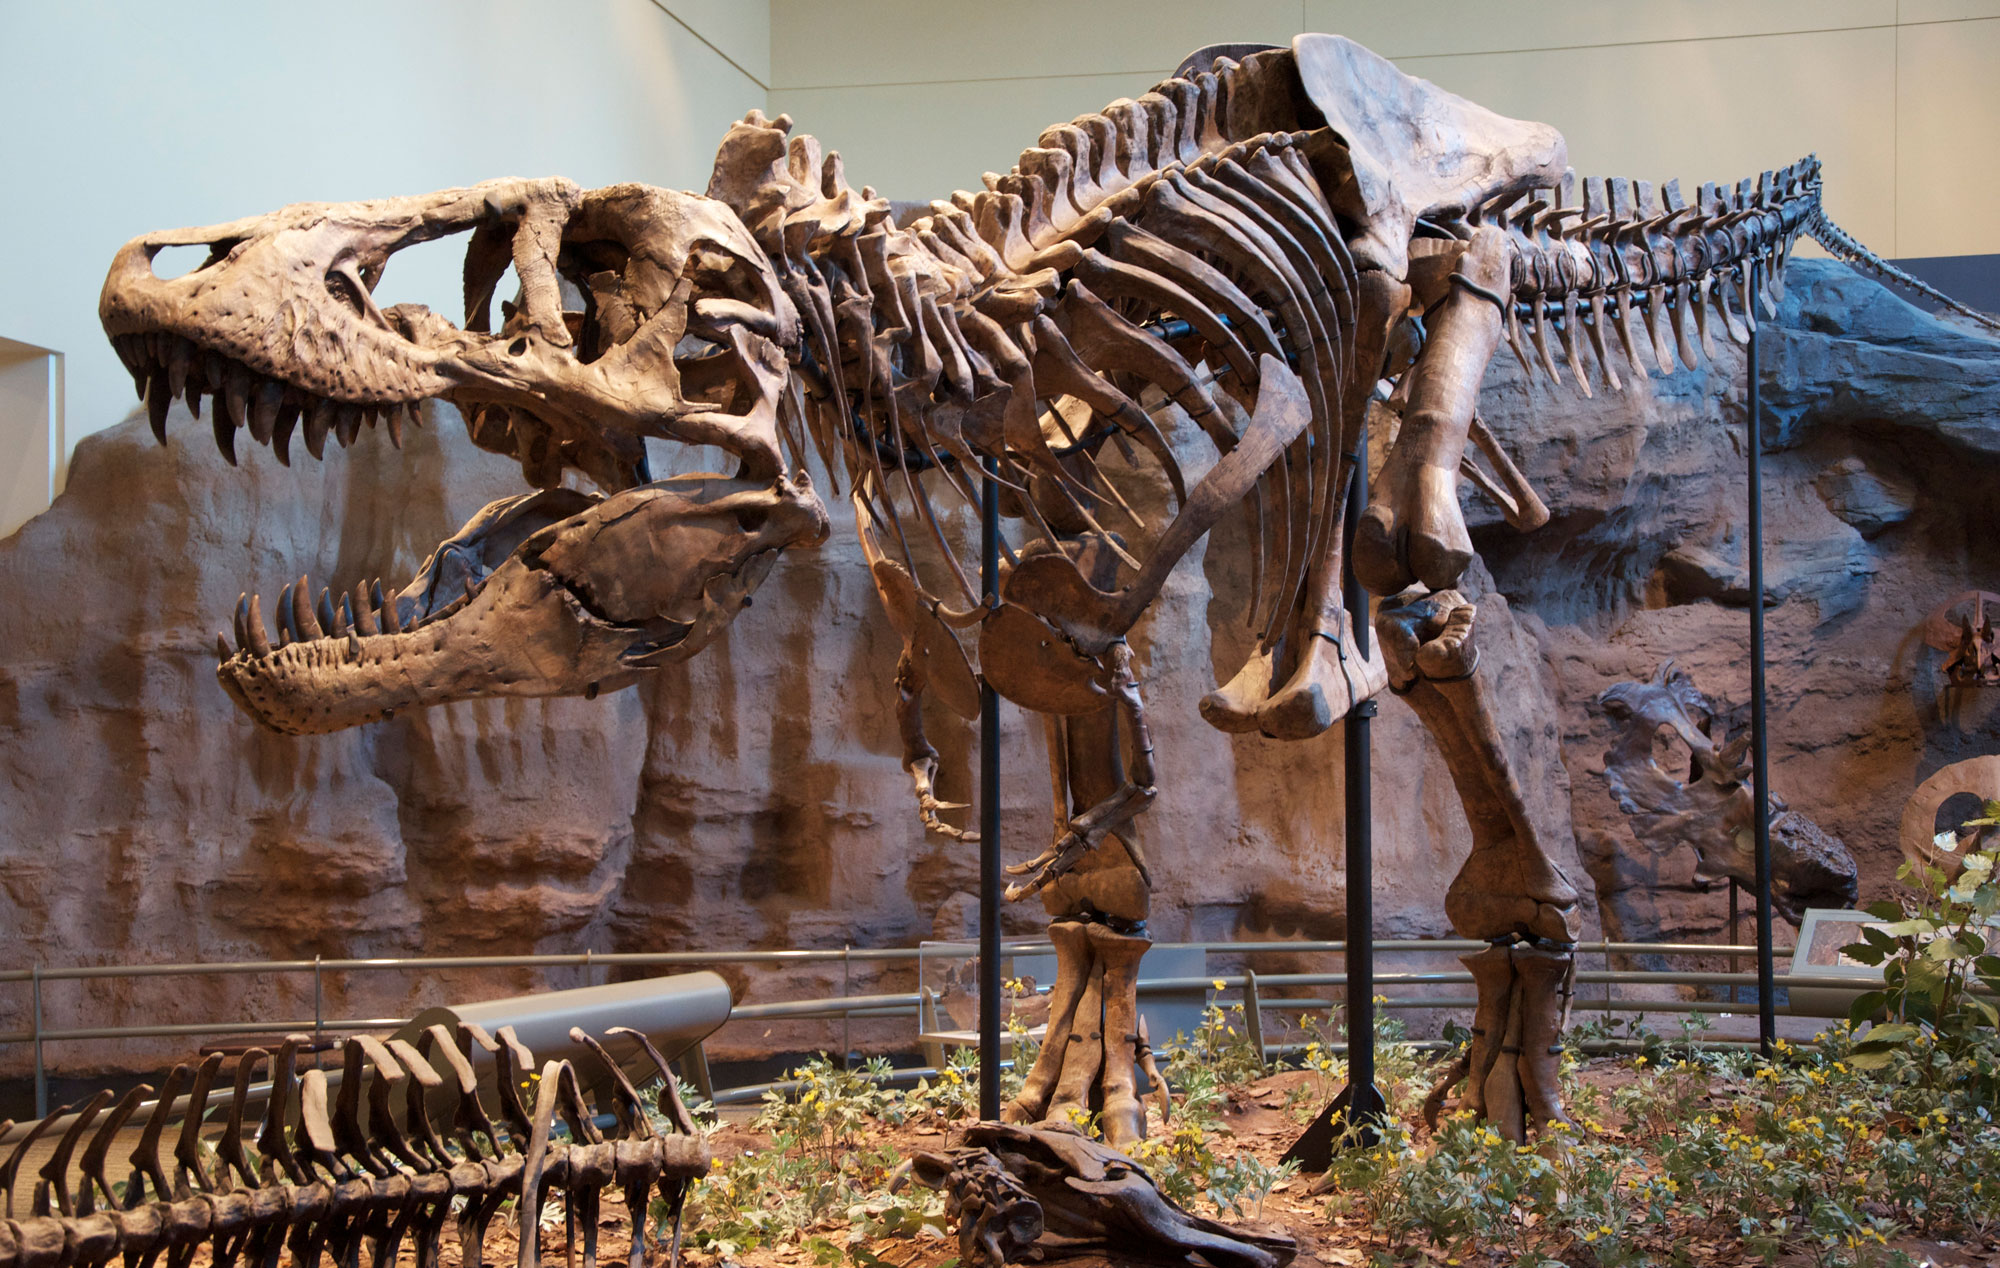 Photograph of a mounted Tyrannosaurus rex specimen on display at the Carnegie Museum in Pittsburgh. Tyrannosaurus is a carnivorous dinosaur with a large skull and large, slightly curved, pointed teeth; it is bipedal, with powerful hind legs and relatively puny arms. The tail is long and held up off the ground. The photo is taken from the front-side of the skeleton, showing a good side view of the large skull. The skeleton is mounted in a standing position.